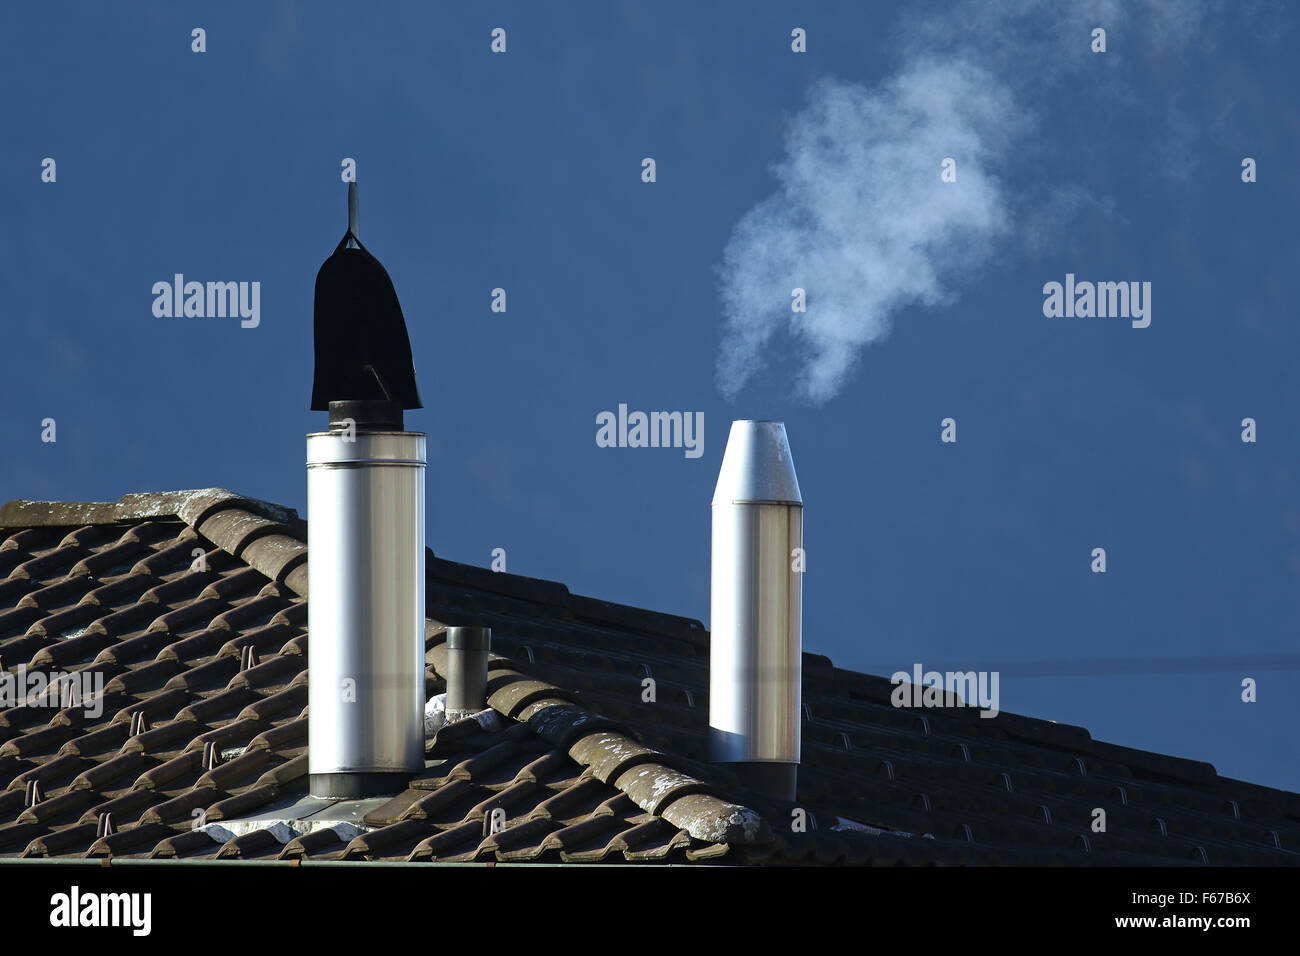 Heating oil going into the air from a filtered stack on a roof Stock Photo